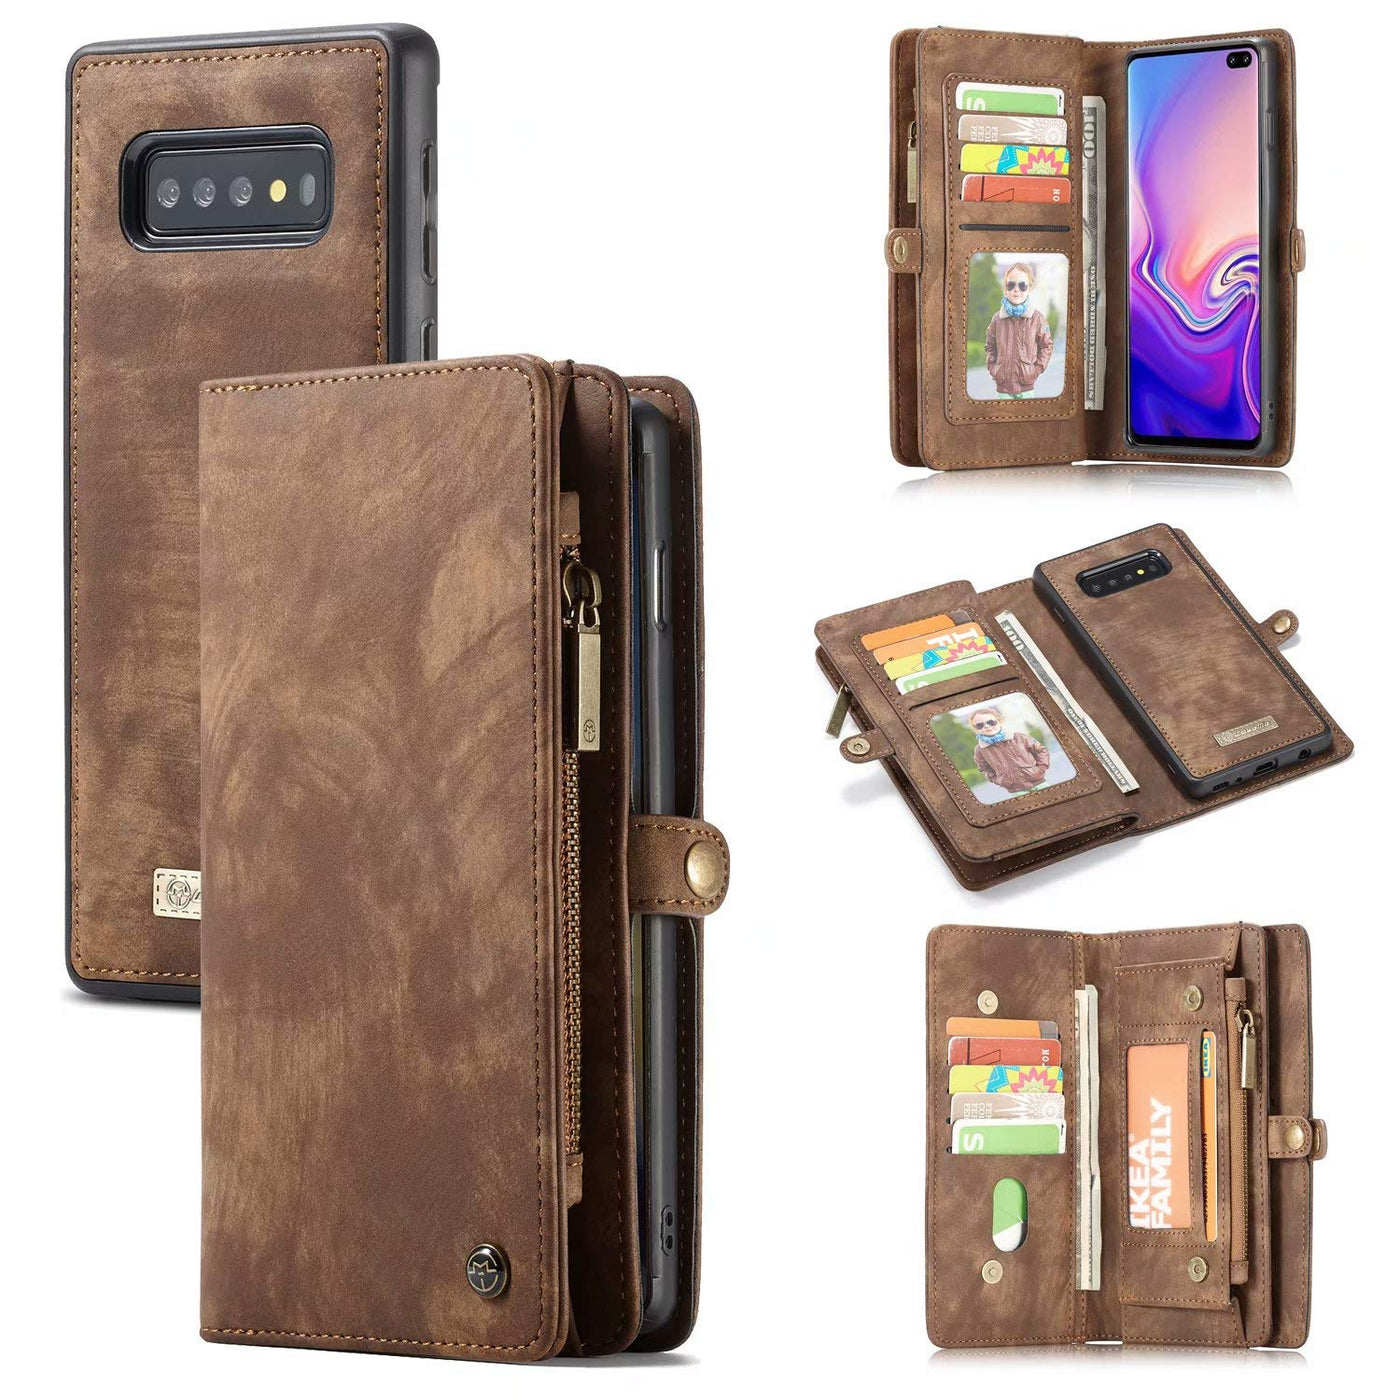 Samsung Galaxy S10 Plus coffee color leather wallet flip case By excelsior